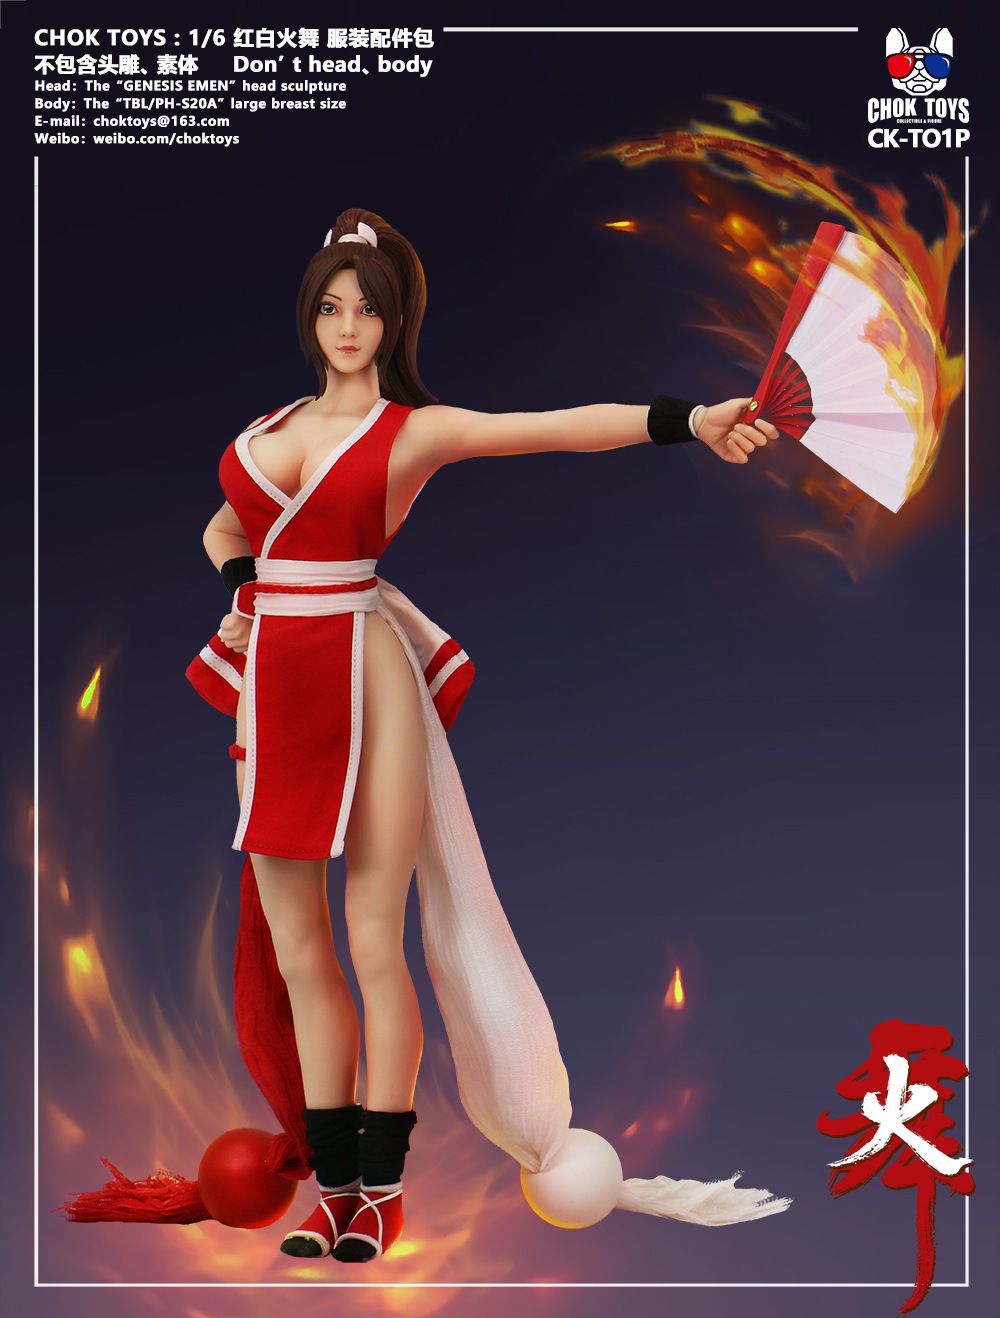 female - NEW PRODUCT: CHOK TOYS:1/6 Fire Dance (Red, White/Black Gold) Clothing Accessories Package 3cf20010